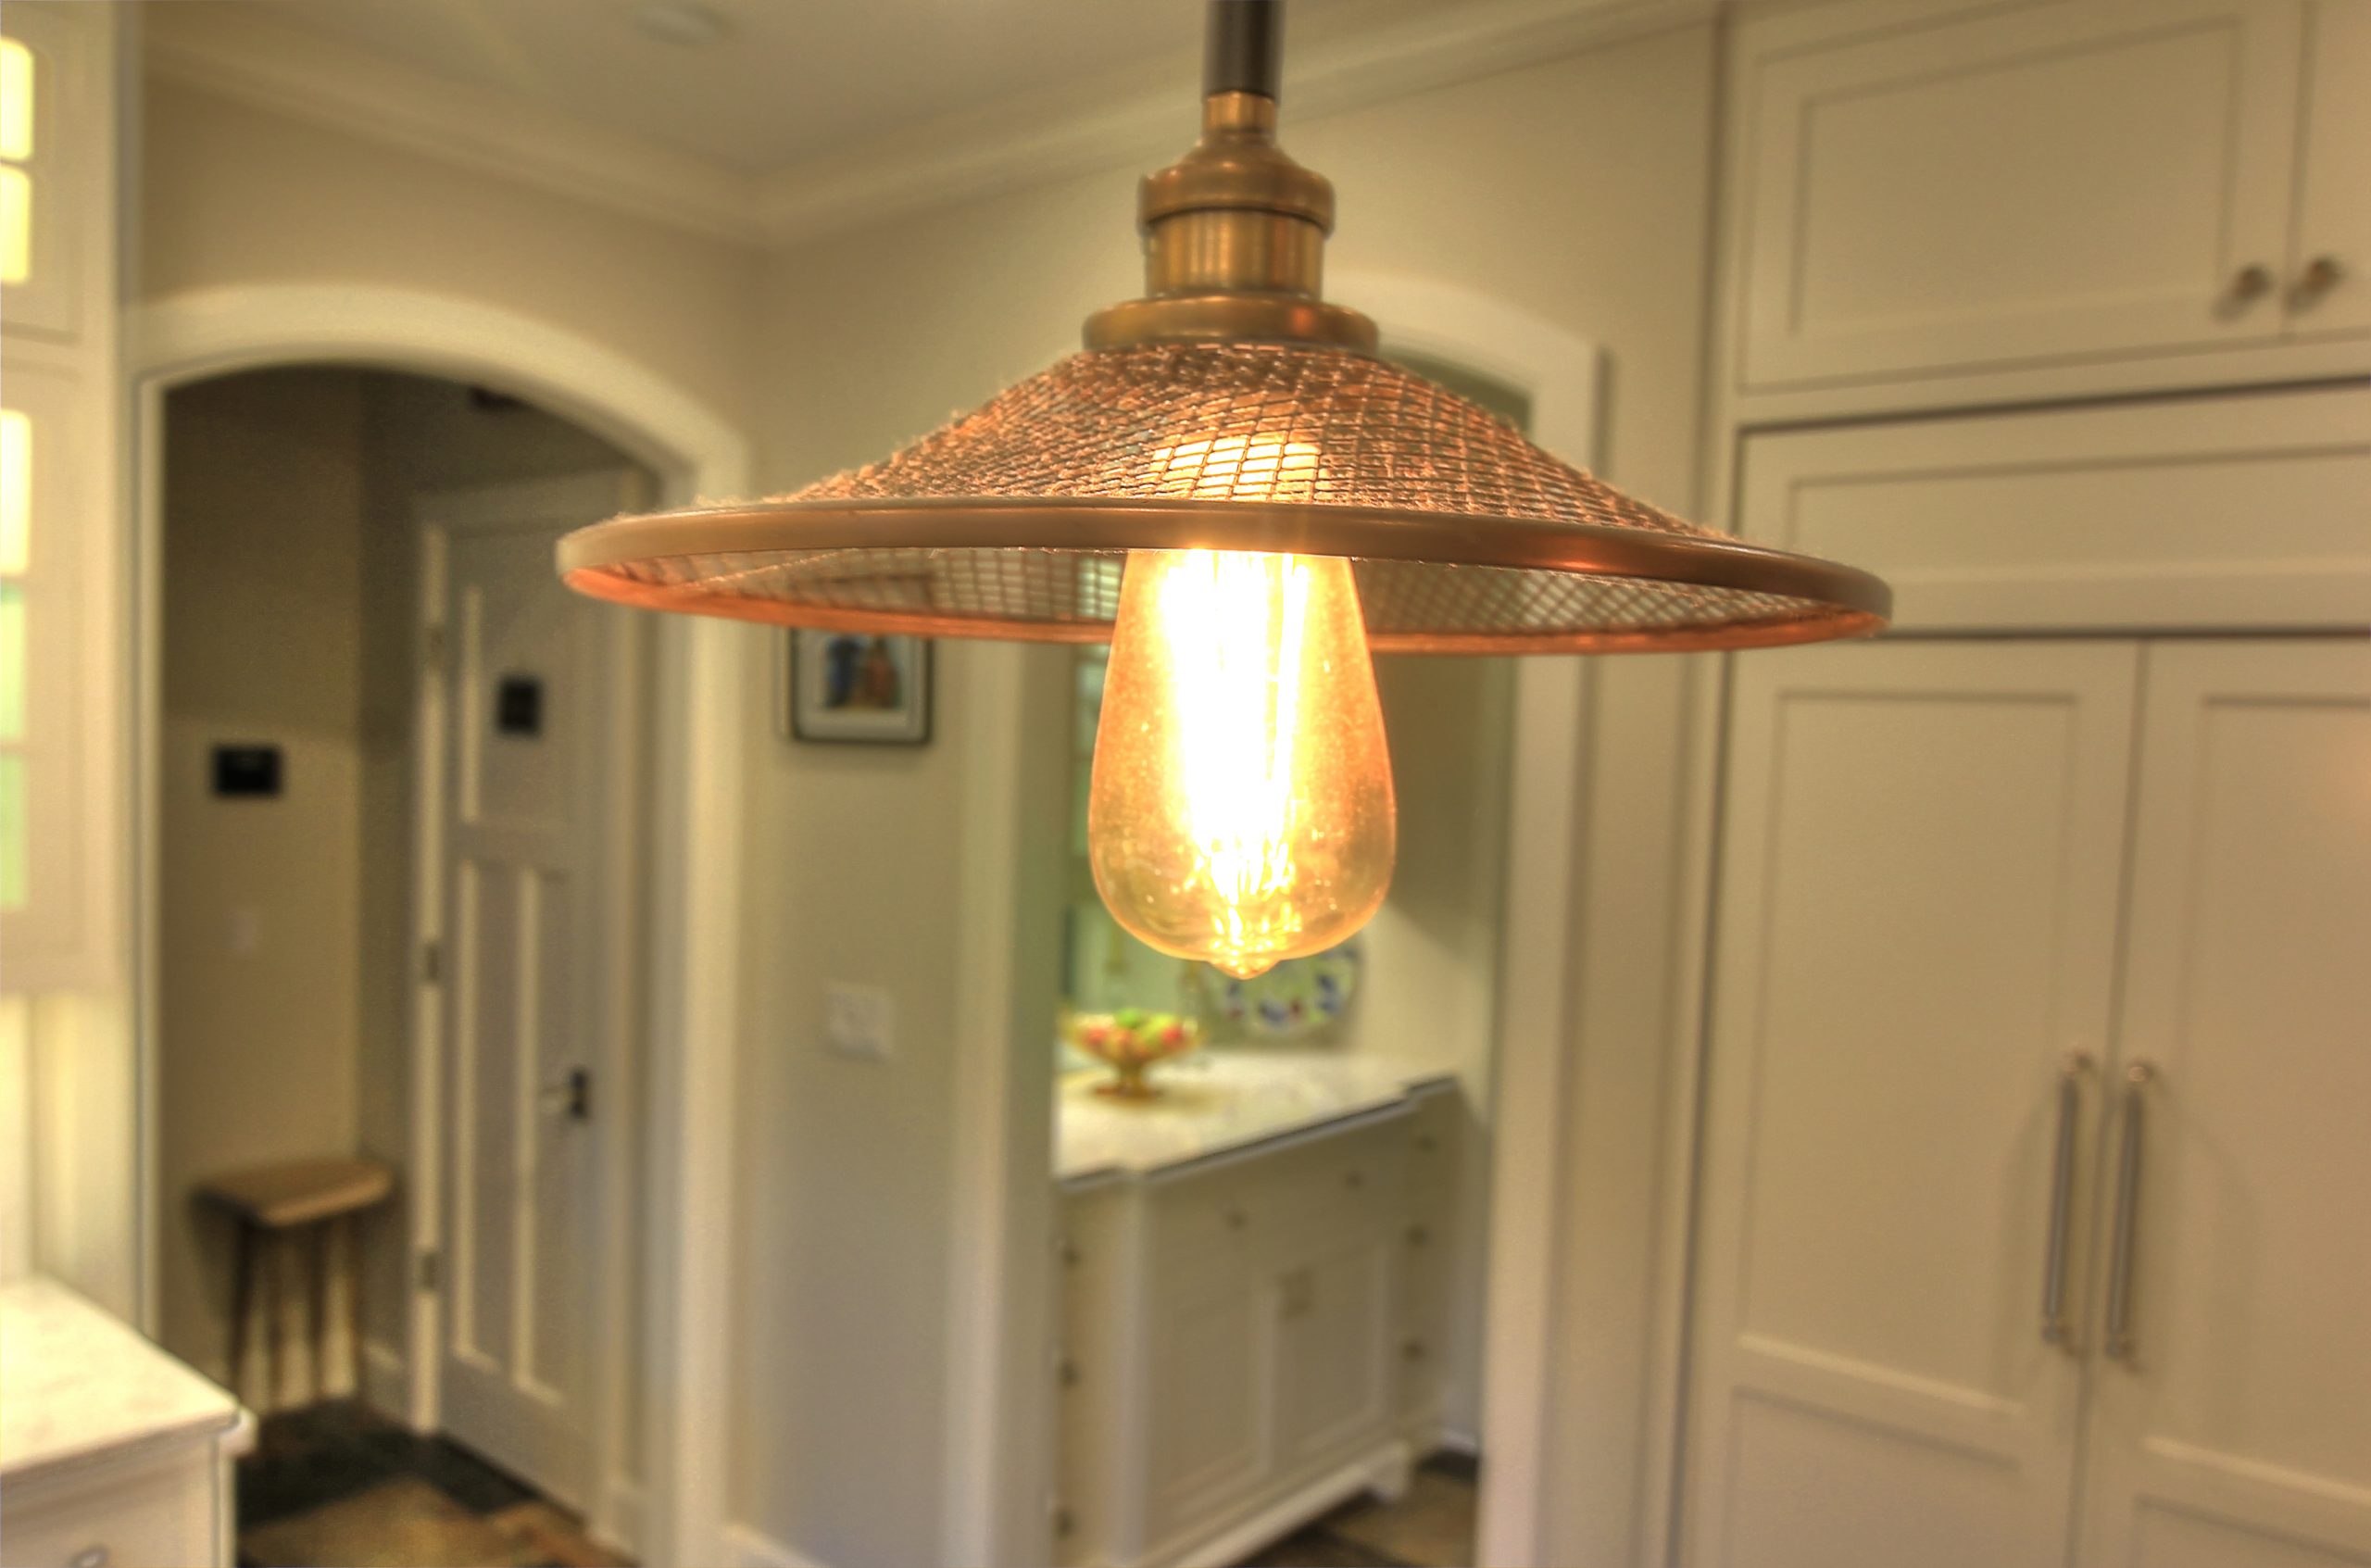 filament bulb installed in a vintage light fixture.